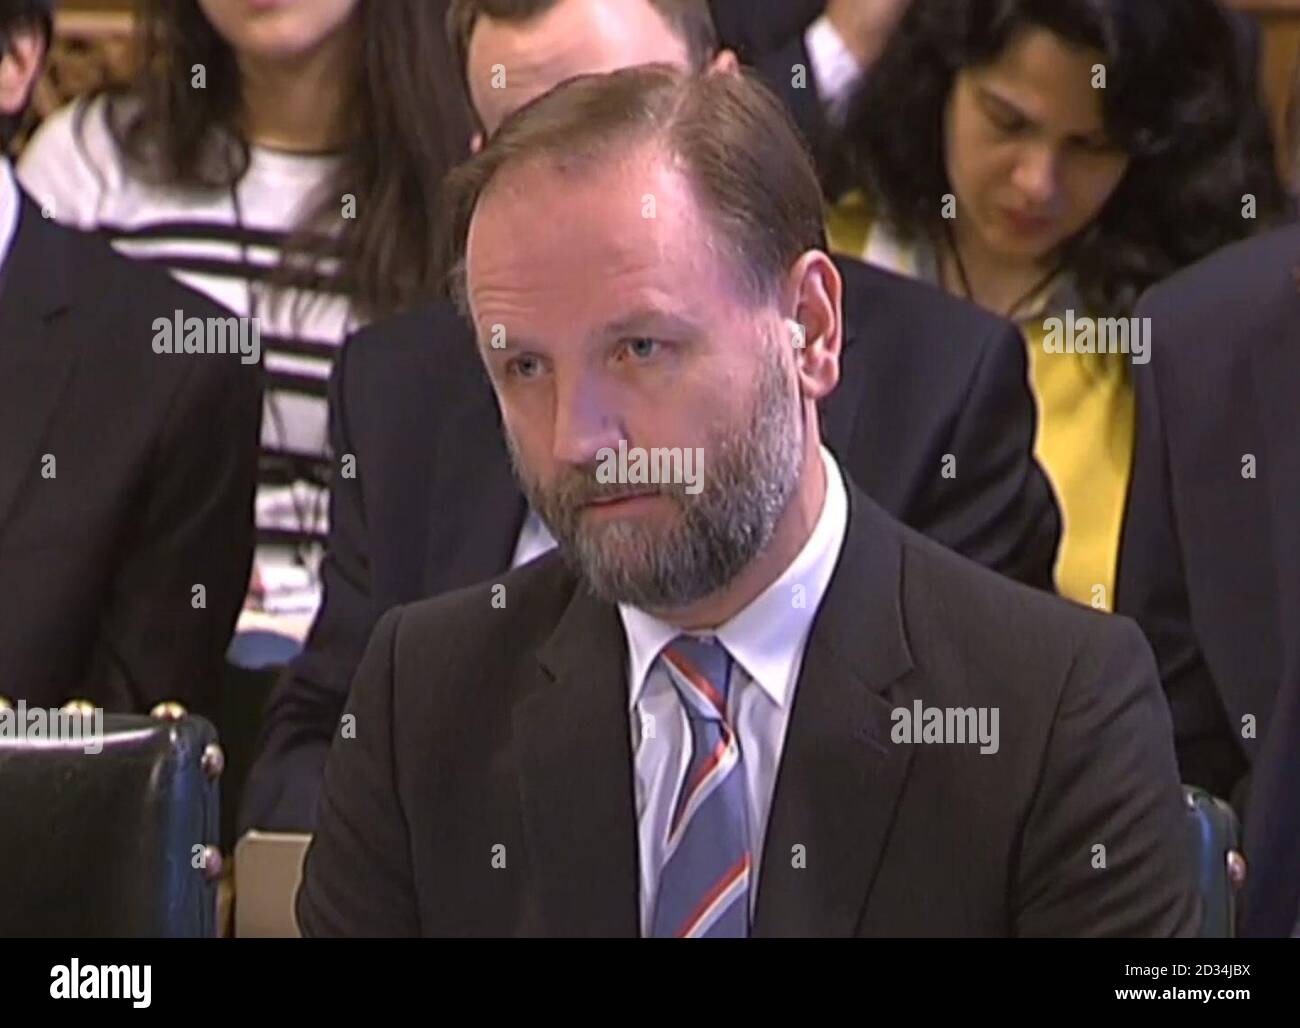 Simon Stevens, Chief Executive of NHS England, appears before the Public Accounts Committee at the House of Commons, London, after the influential parliamentary committee said public 'bickering' between Theresa May and the NHS over funding at a time when the health service is facing severe financial problems is an 'insult to taxpayers'. Stock Photo